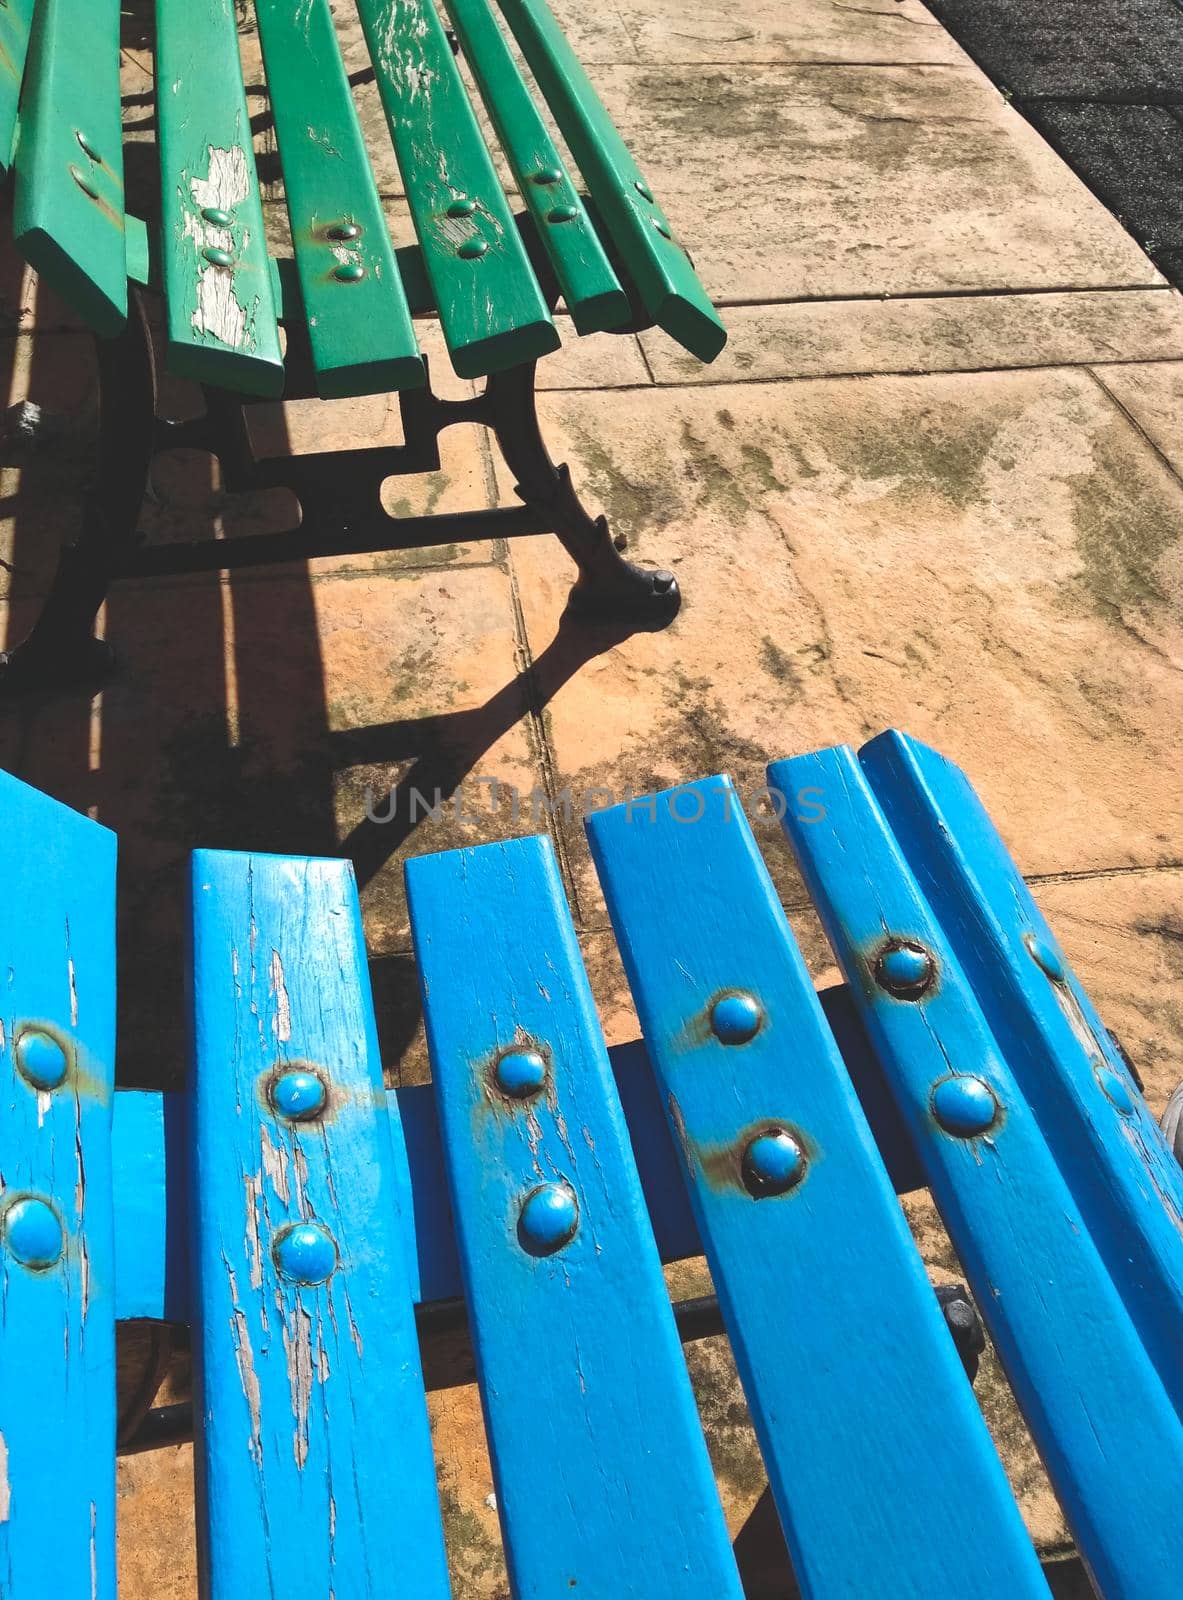 Close-up of blue and green painted wooden benches in a public park area by tennesseewitney